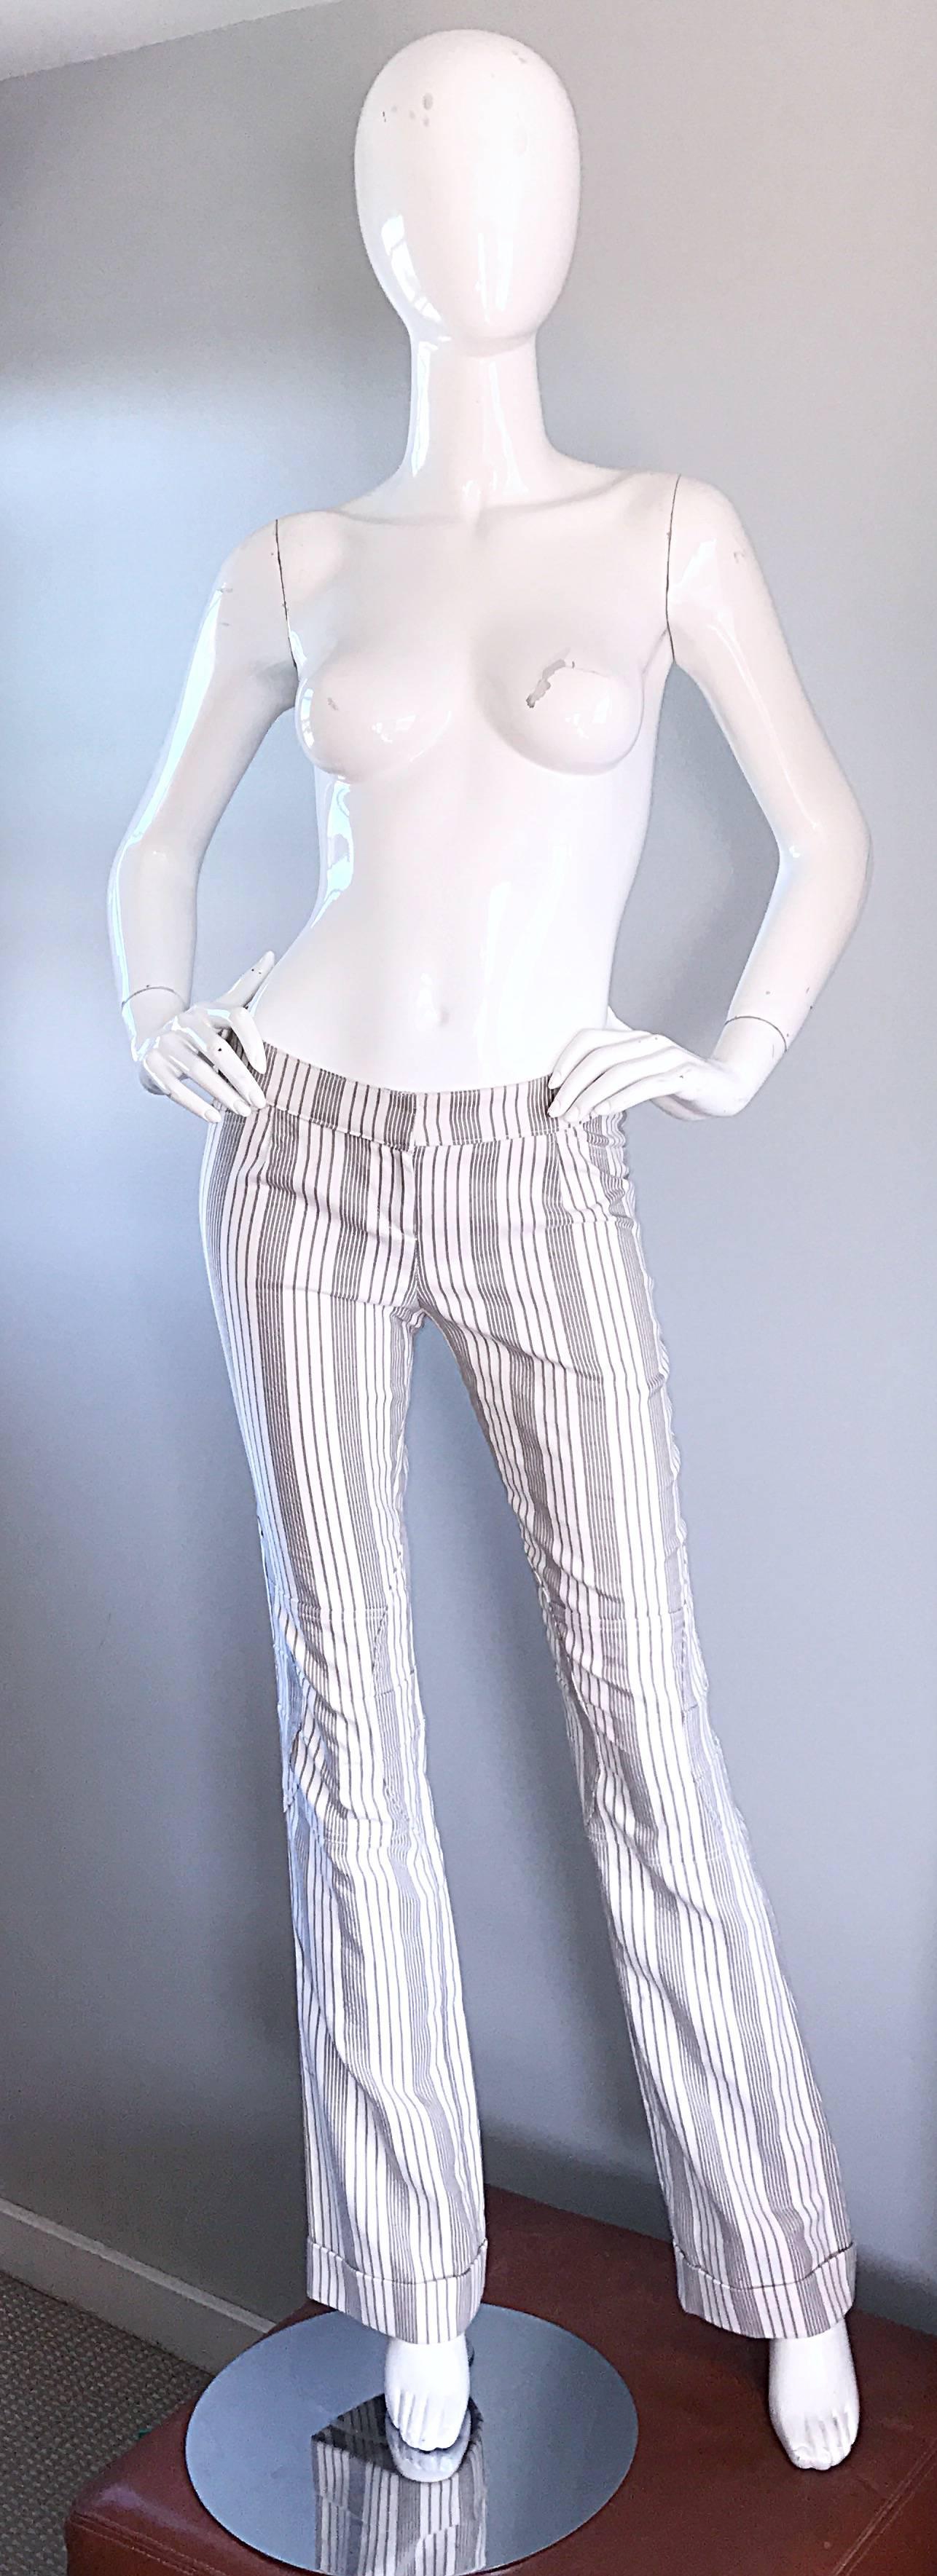 Flattering Vintage 2000s CHRISTIAN DIOR by JOHN GALLIANO cotton grey and white Pinstripe wide flared led cuffed pants! Embroidered detail at knees. Can easily be dressed up or down. Looks amazing on!
Made in France.
Marked Size US 6
Measurements: